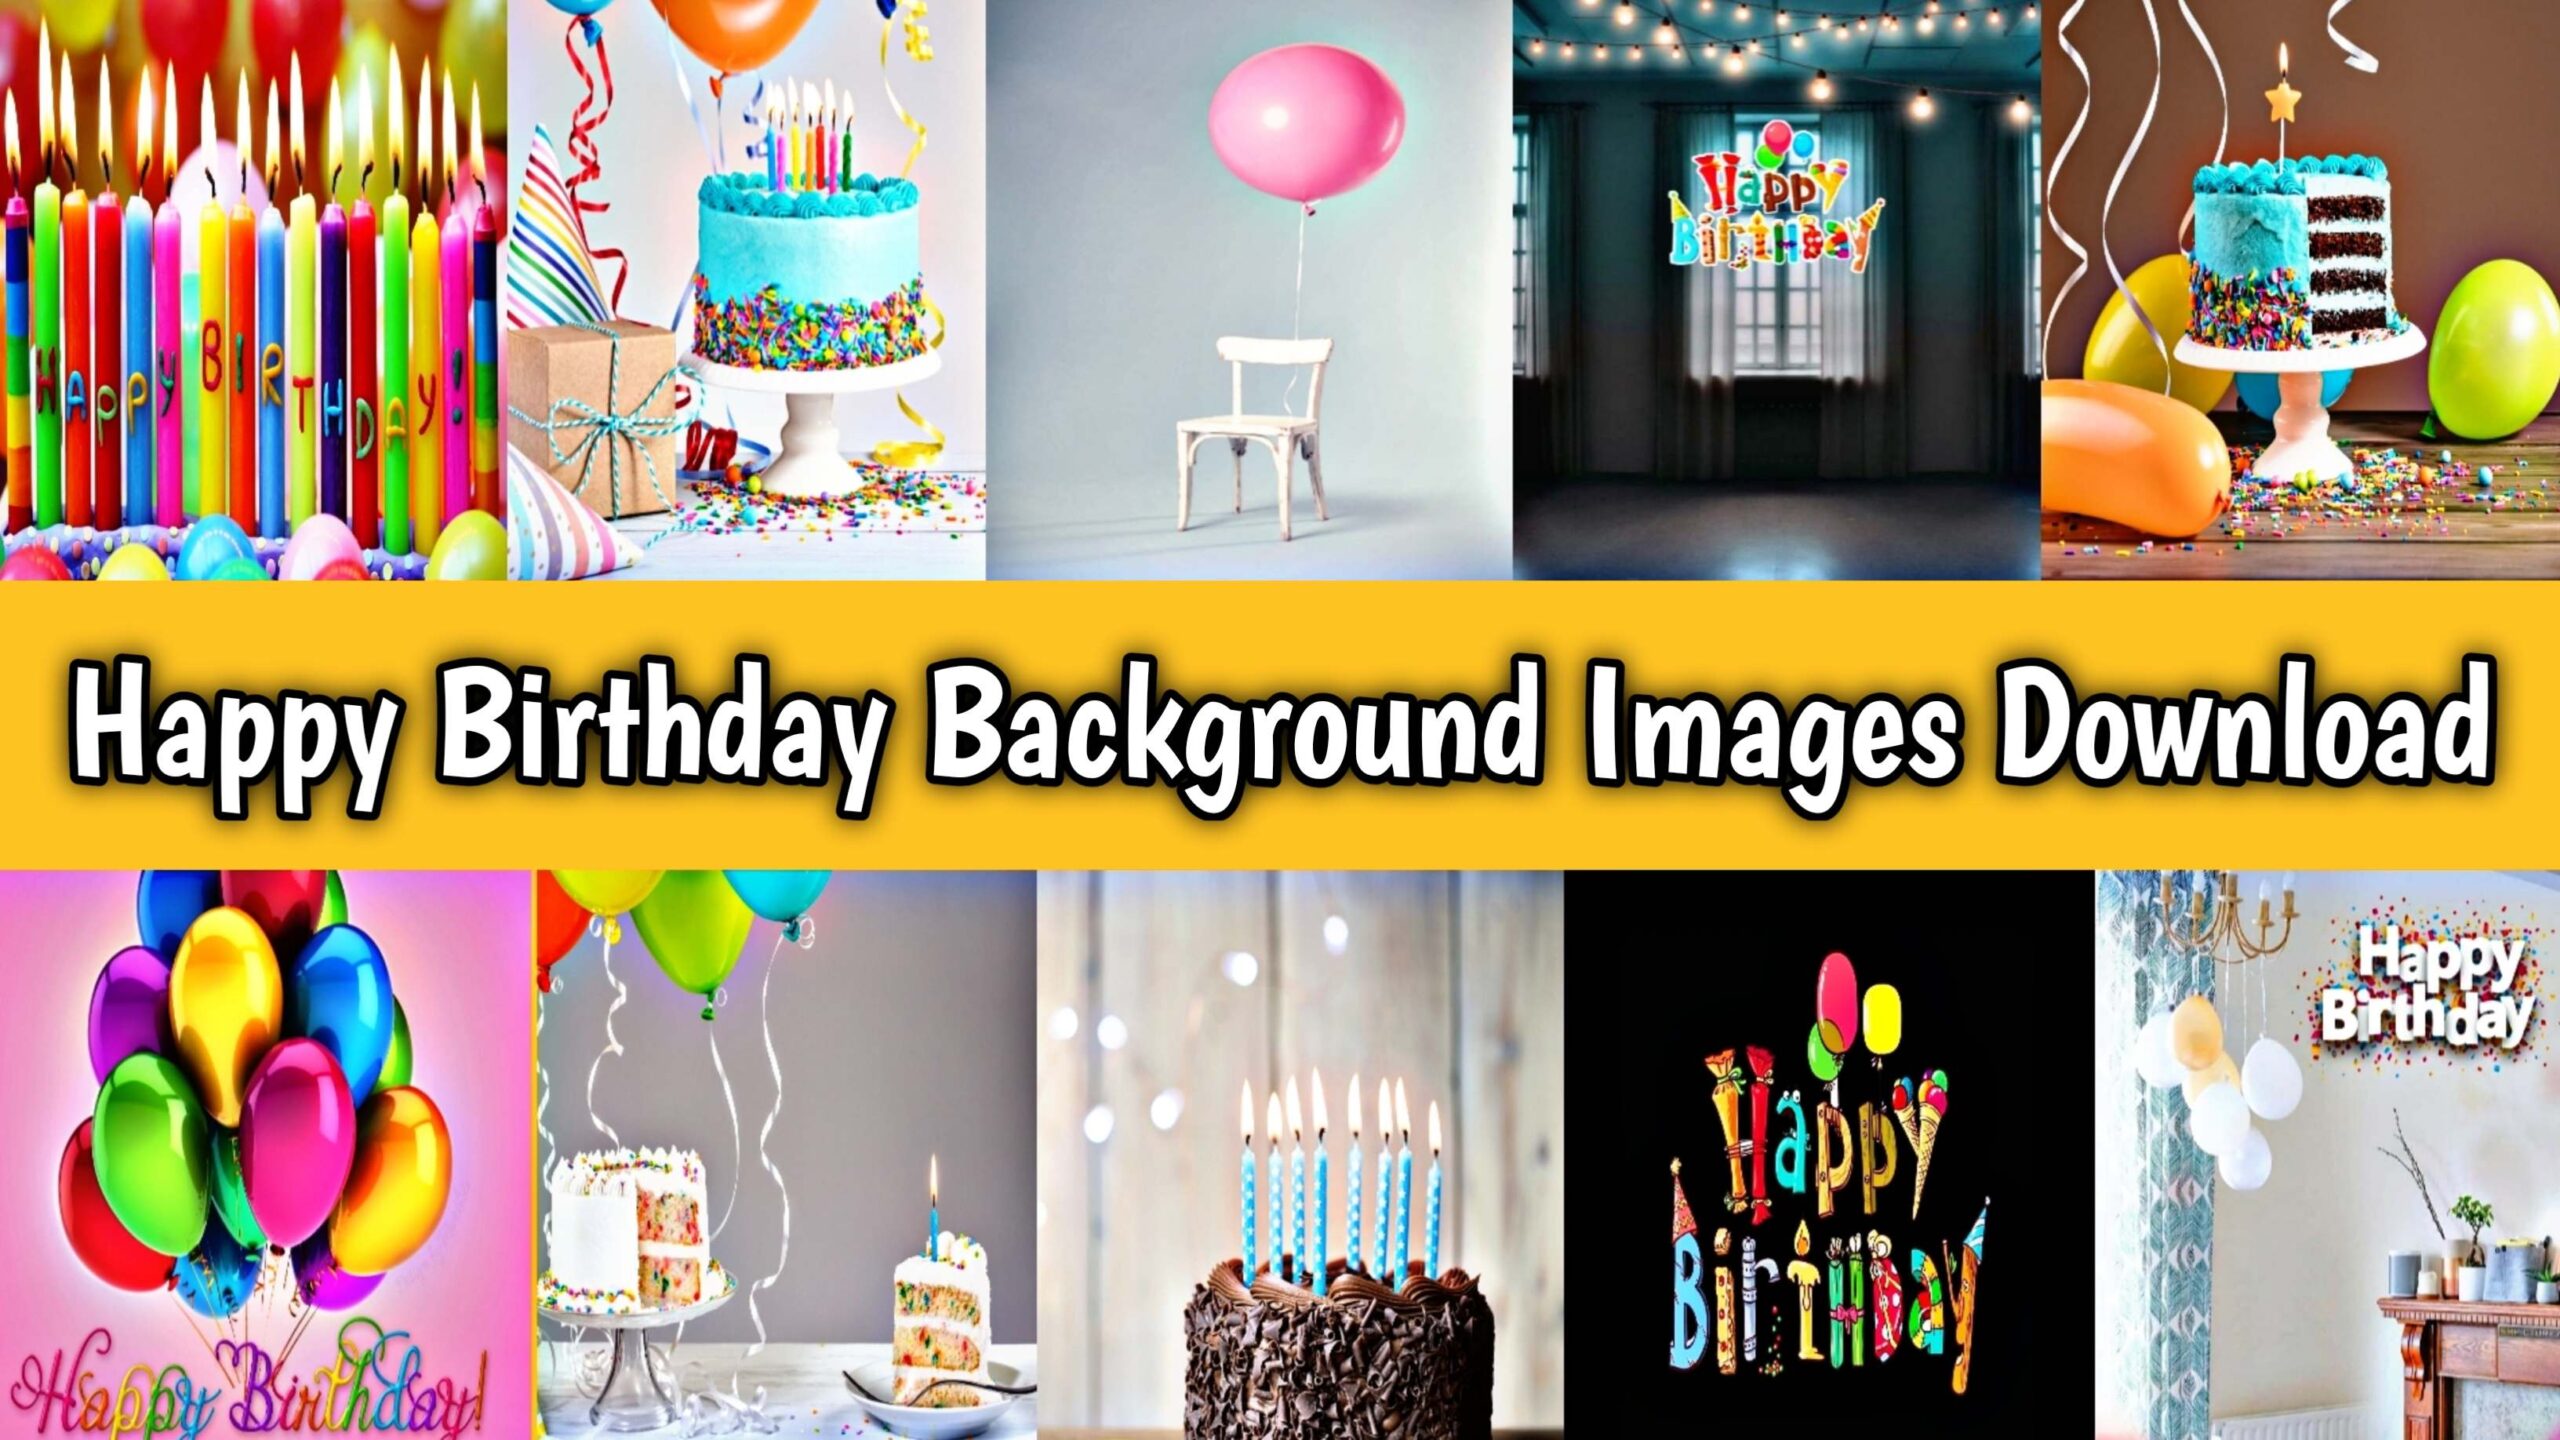 Happy Birthday Background Images Download